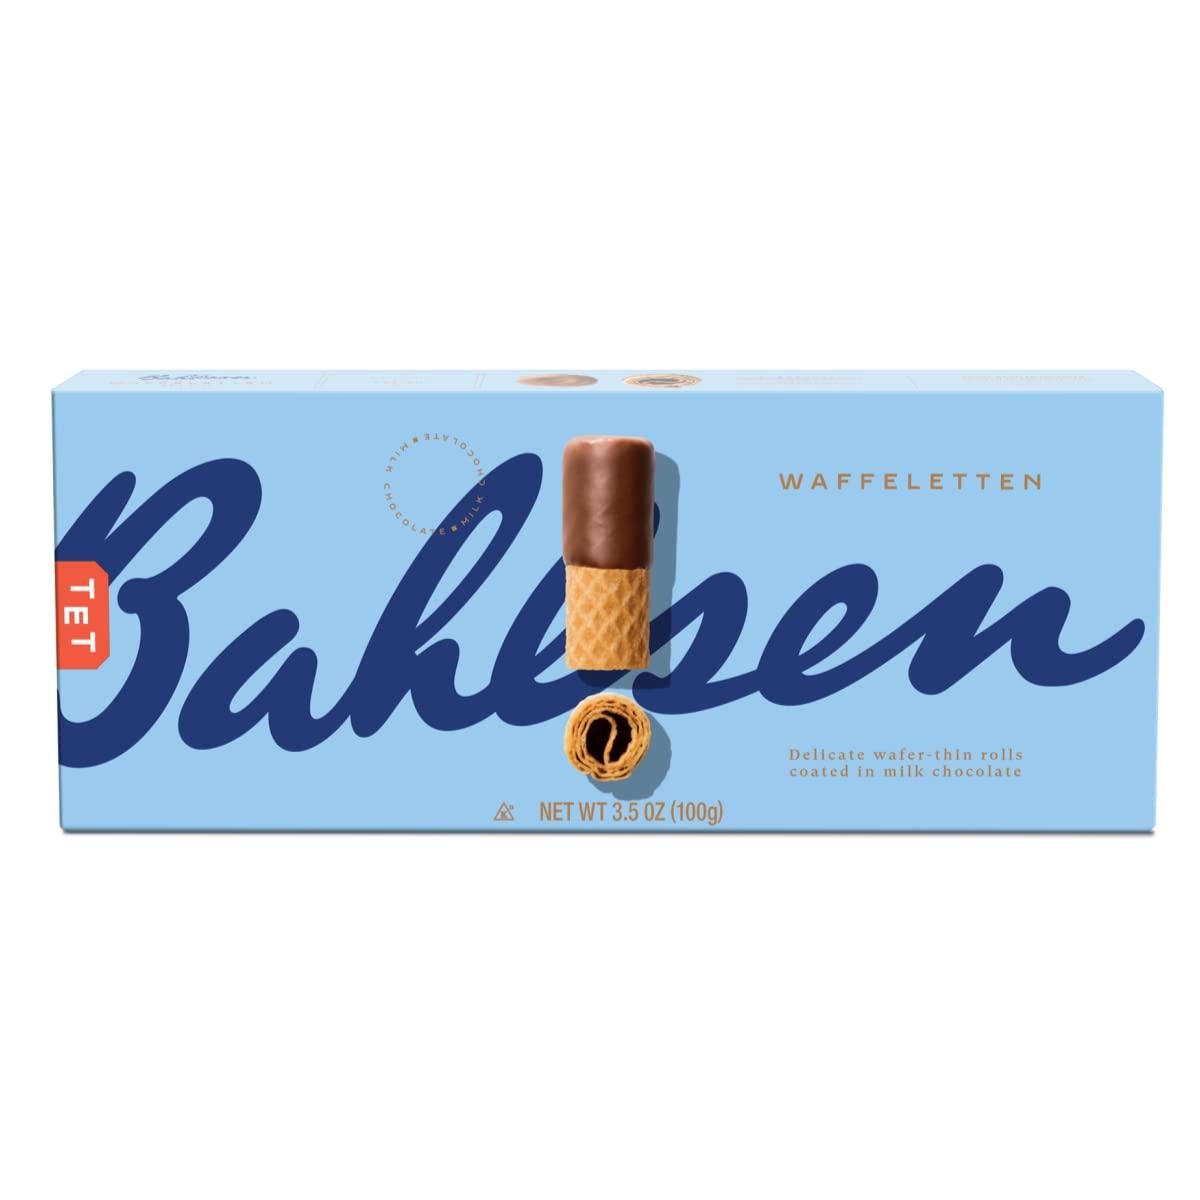 Bahlsen Waffeletten Milk Chocolate Dipped Cookies - Delicate wafer ...